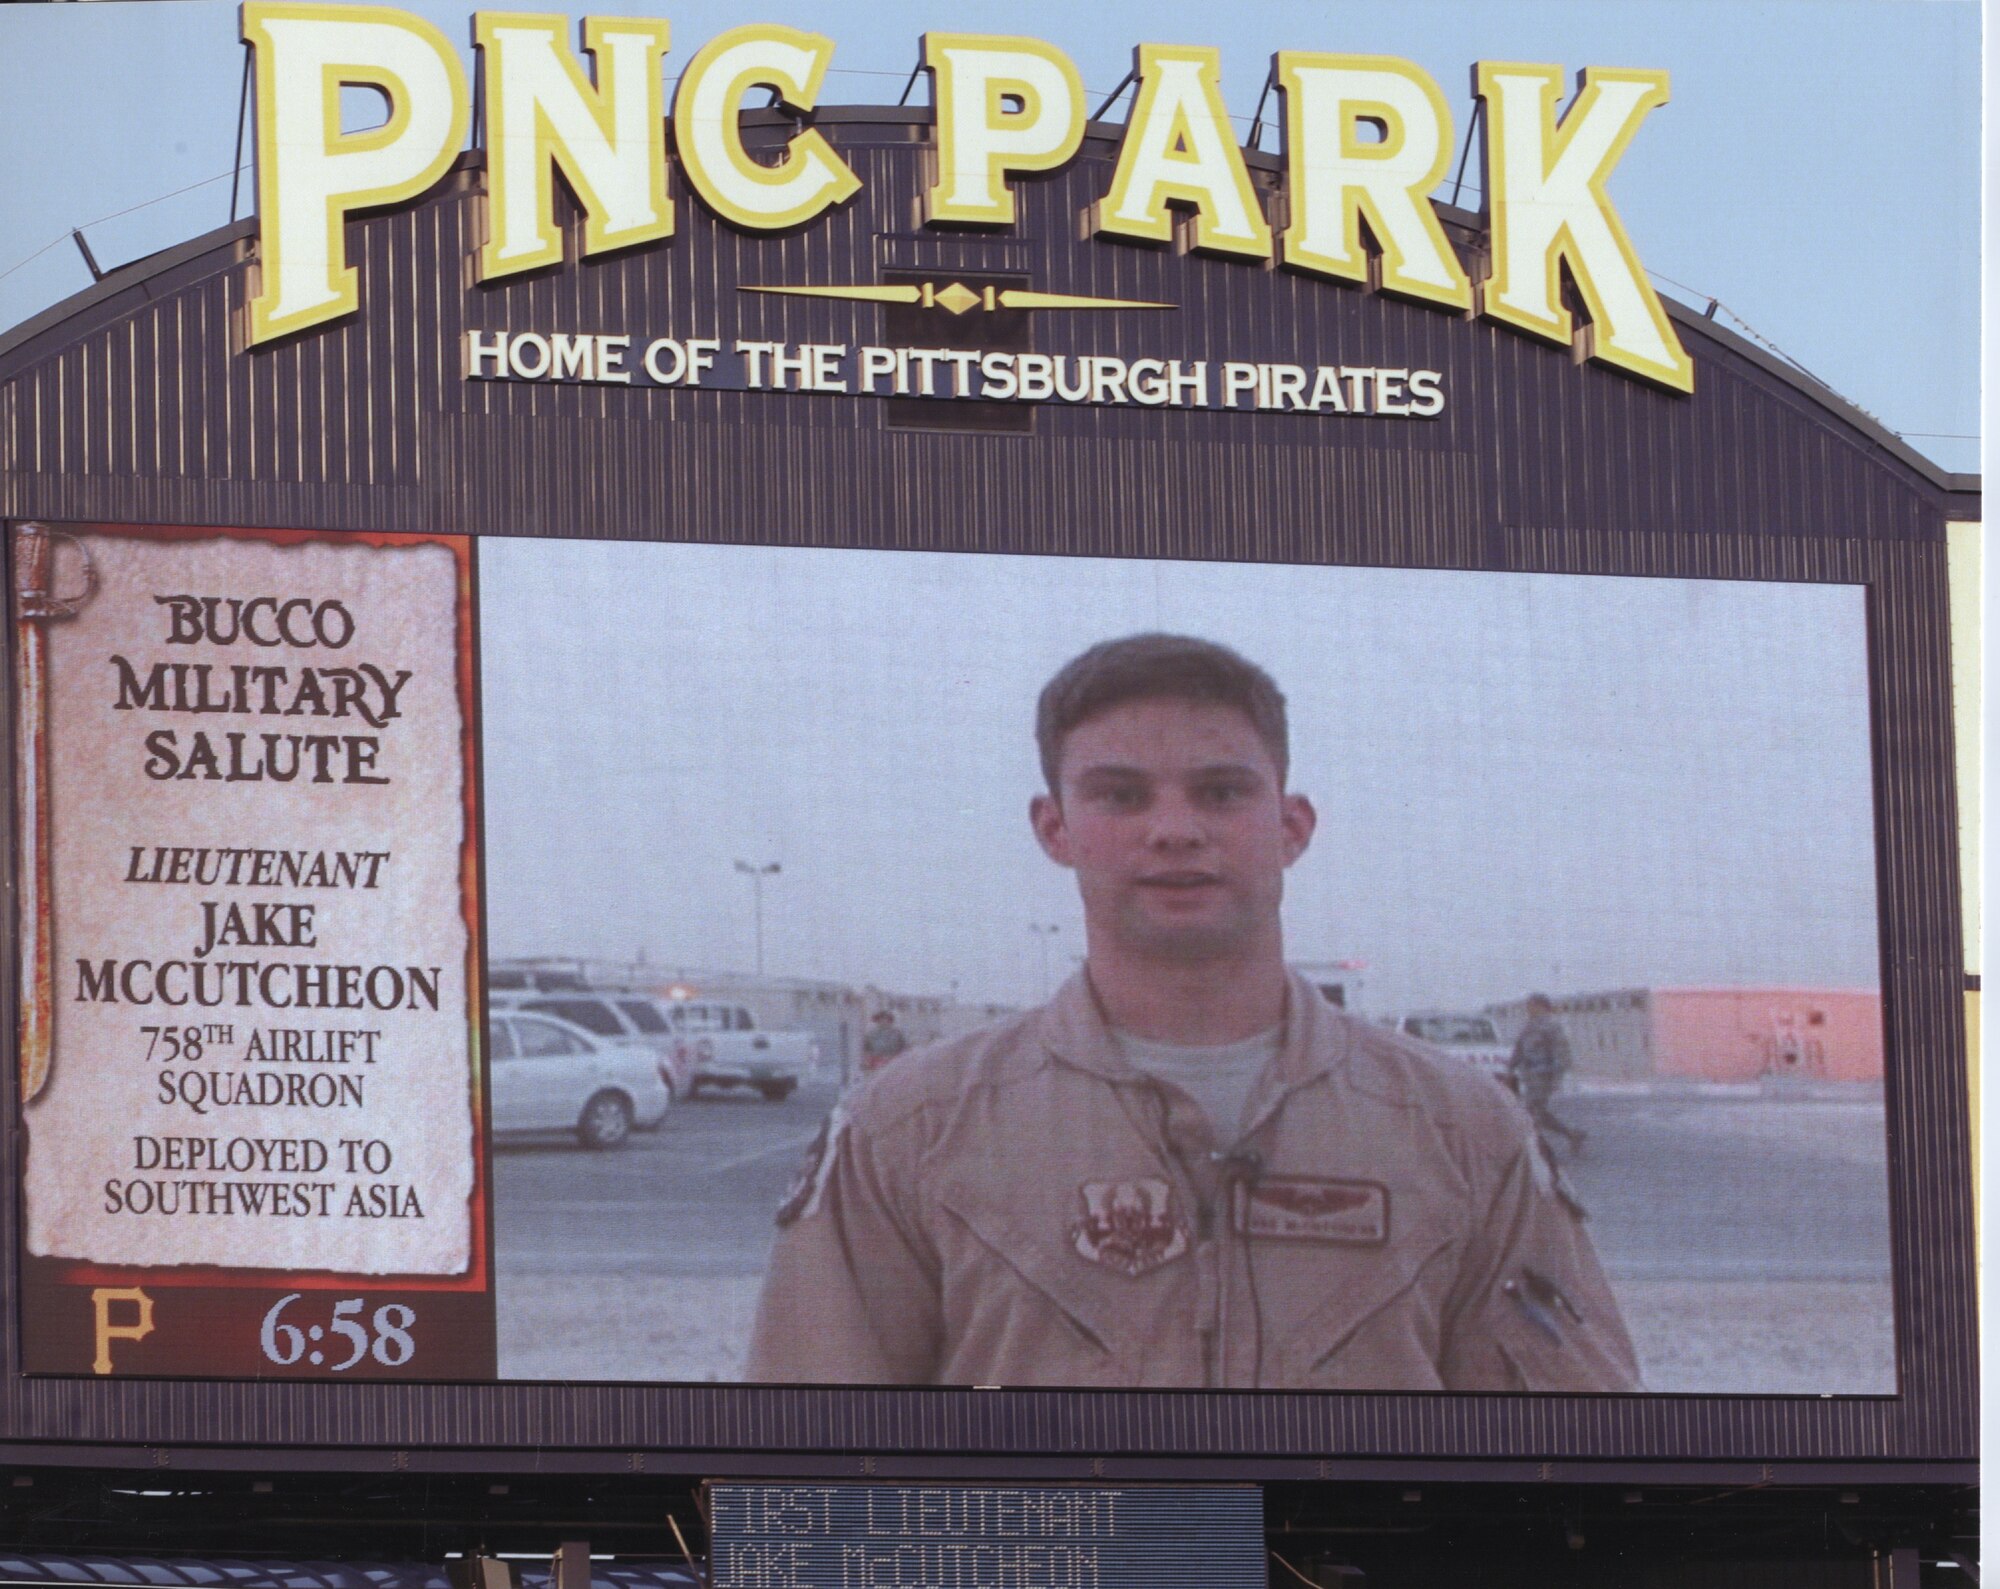 Lt. Jake McCutcheon, while deployed overseas sent home a video greeting which aired on the PNC Park scoreboard during a recent Pittsburgh Pirates home game. Sgt. George said hello to his family and kicked off the game as part of the 'Bucco Military Salute' program. Lt.. McCutcheon was part of the operations and maintenance package which returned May 19 after a successful 120-day AEF rotation in support of contingency operations overseas. (photo courtesy of the Pittsburgh Pirates)